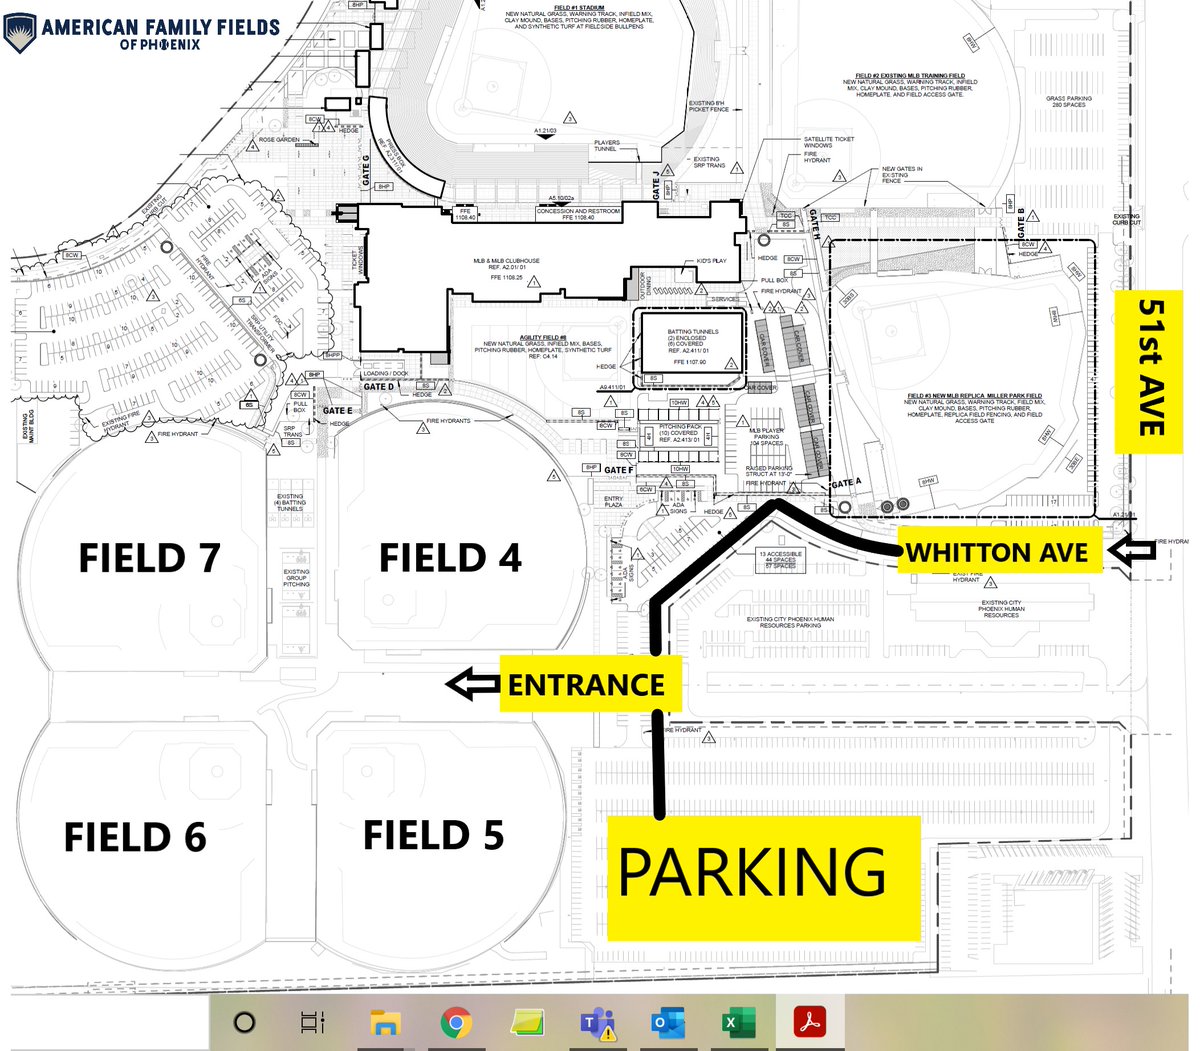 All players, coaches, umpires and fans need to enter Maryvale facility from 51st Ave. this week (see map below)